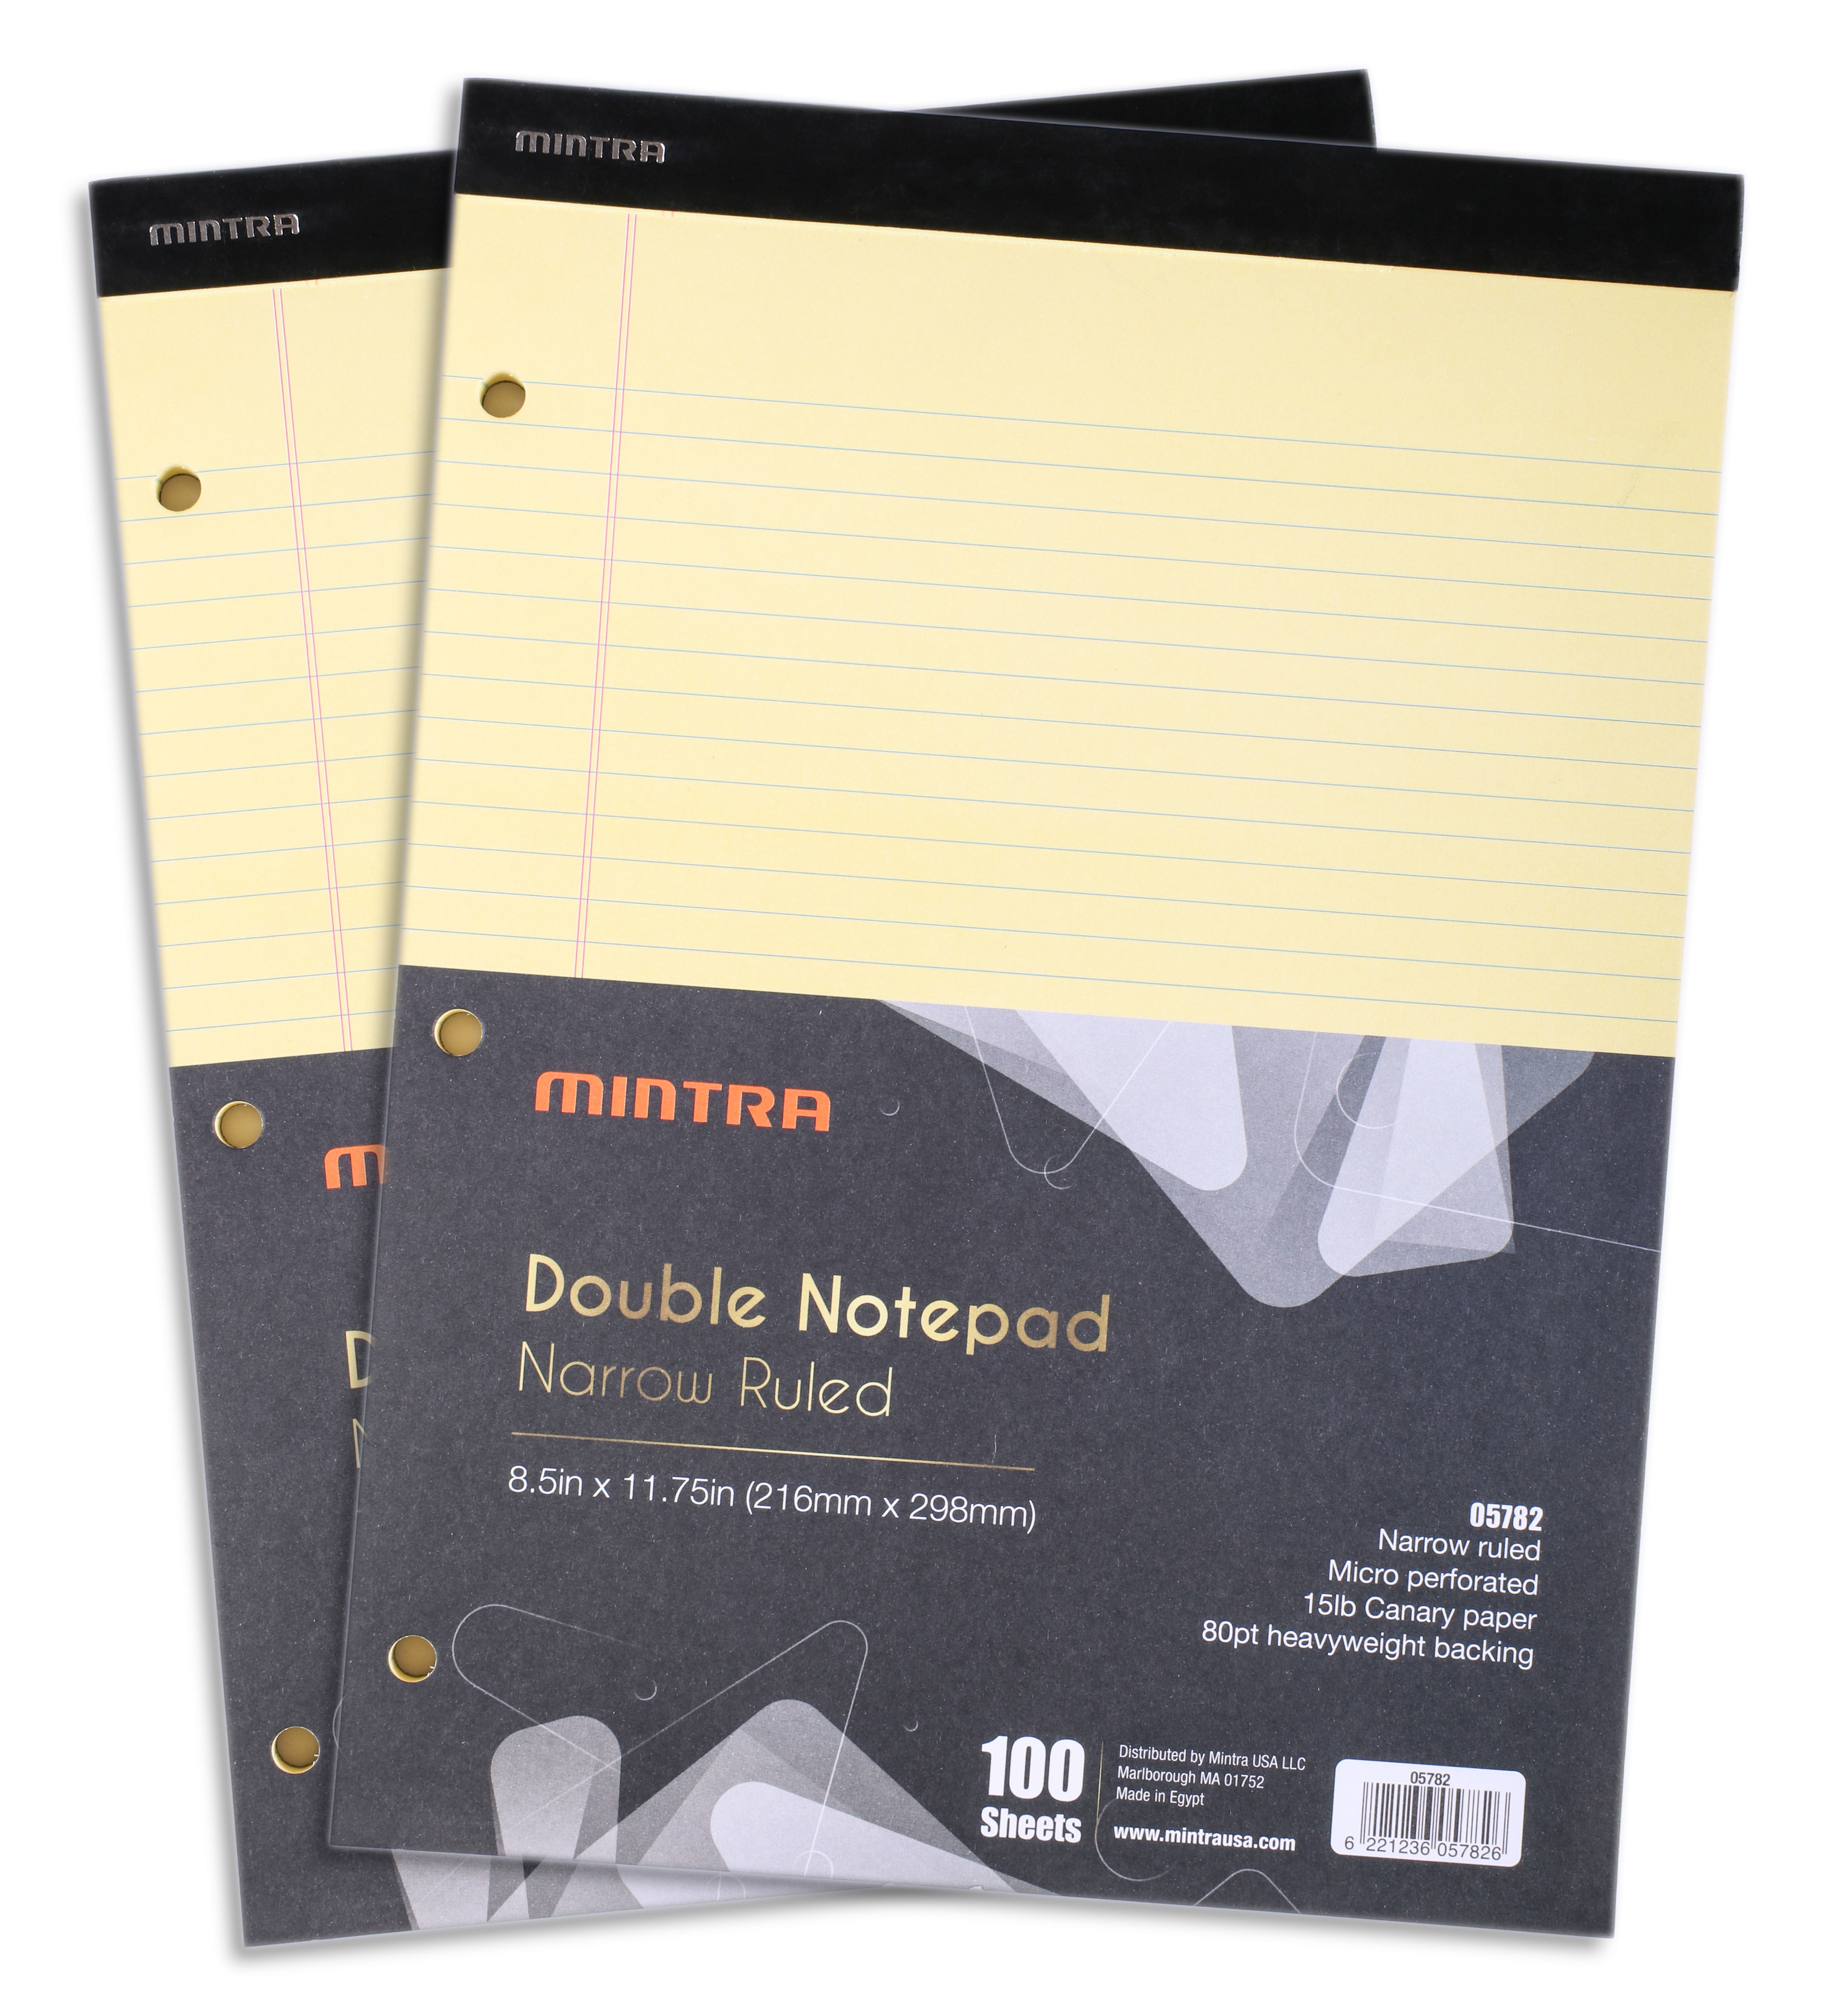 Office Micro perforated Writing Pad - 50 Sheets per Notepad Notebook Paper for School College Mintra Office Legal Pads - Business BASIC PASTEL 6pk, 8.5in x 11in, WIDE RULED 